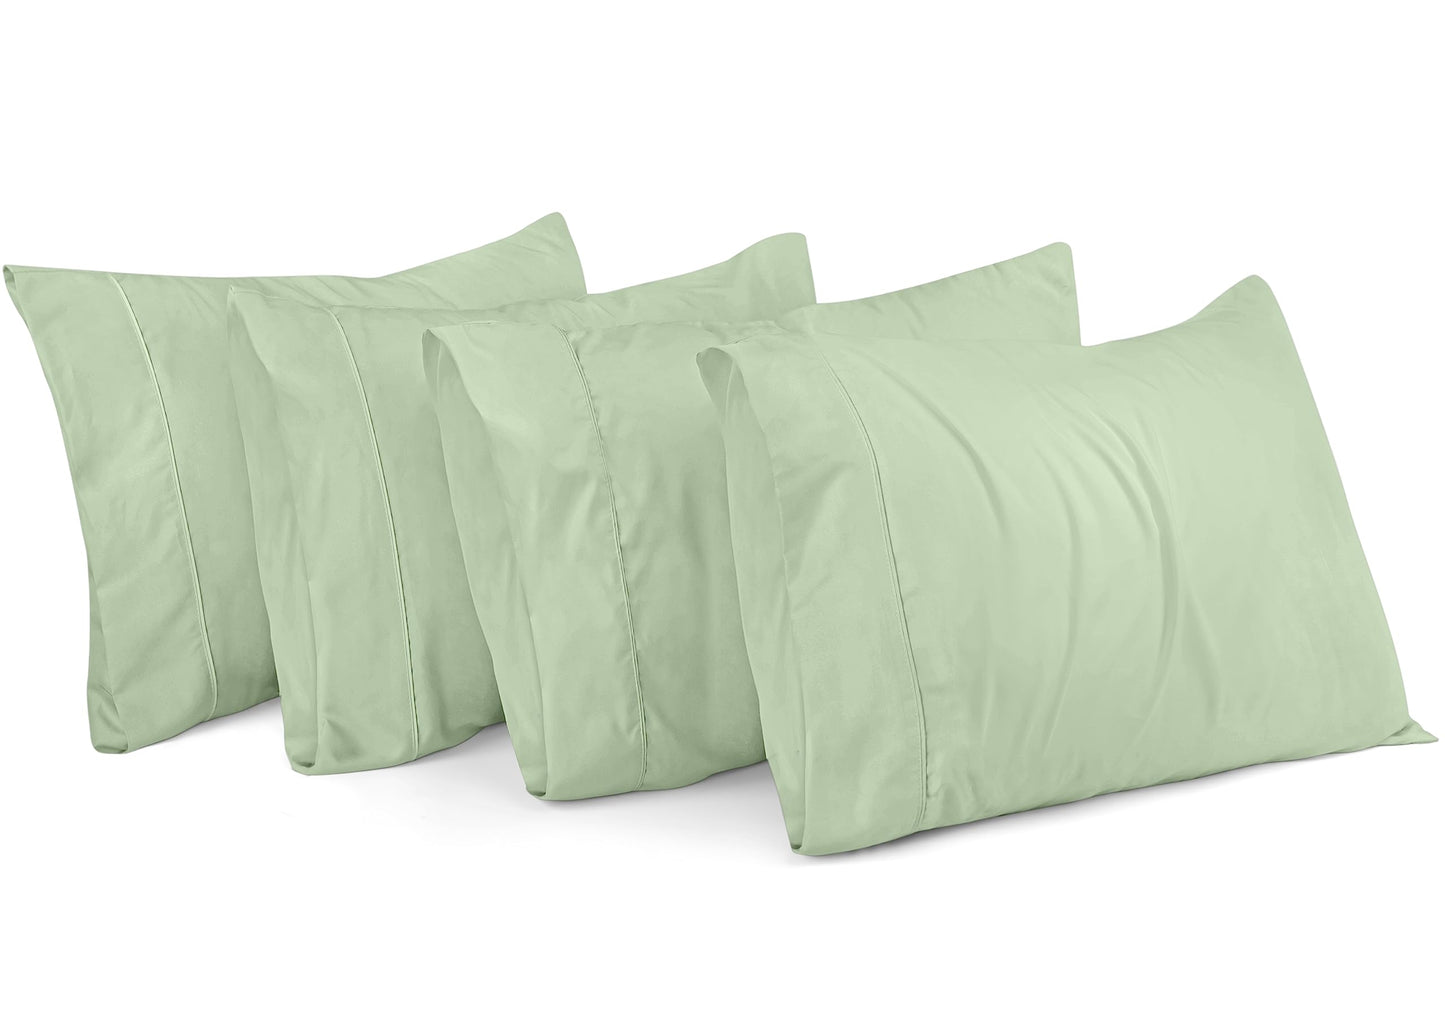 Utopia Bedding Queen Pillow Cases - 4 Pack - Envelope Closure - Soft Brushed Microfiber Fabric - Shrinkage and Fade Resistant Pillow Cases Queen Size 20 X 30 Inches (Queen, Sage)